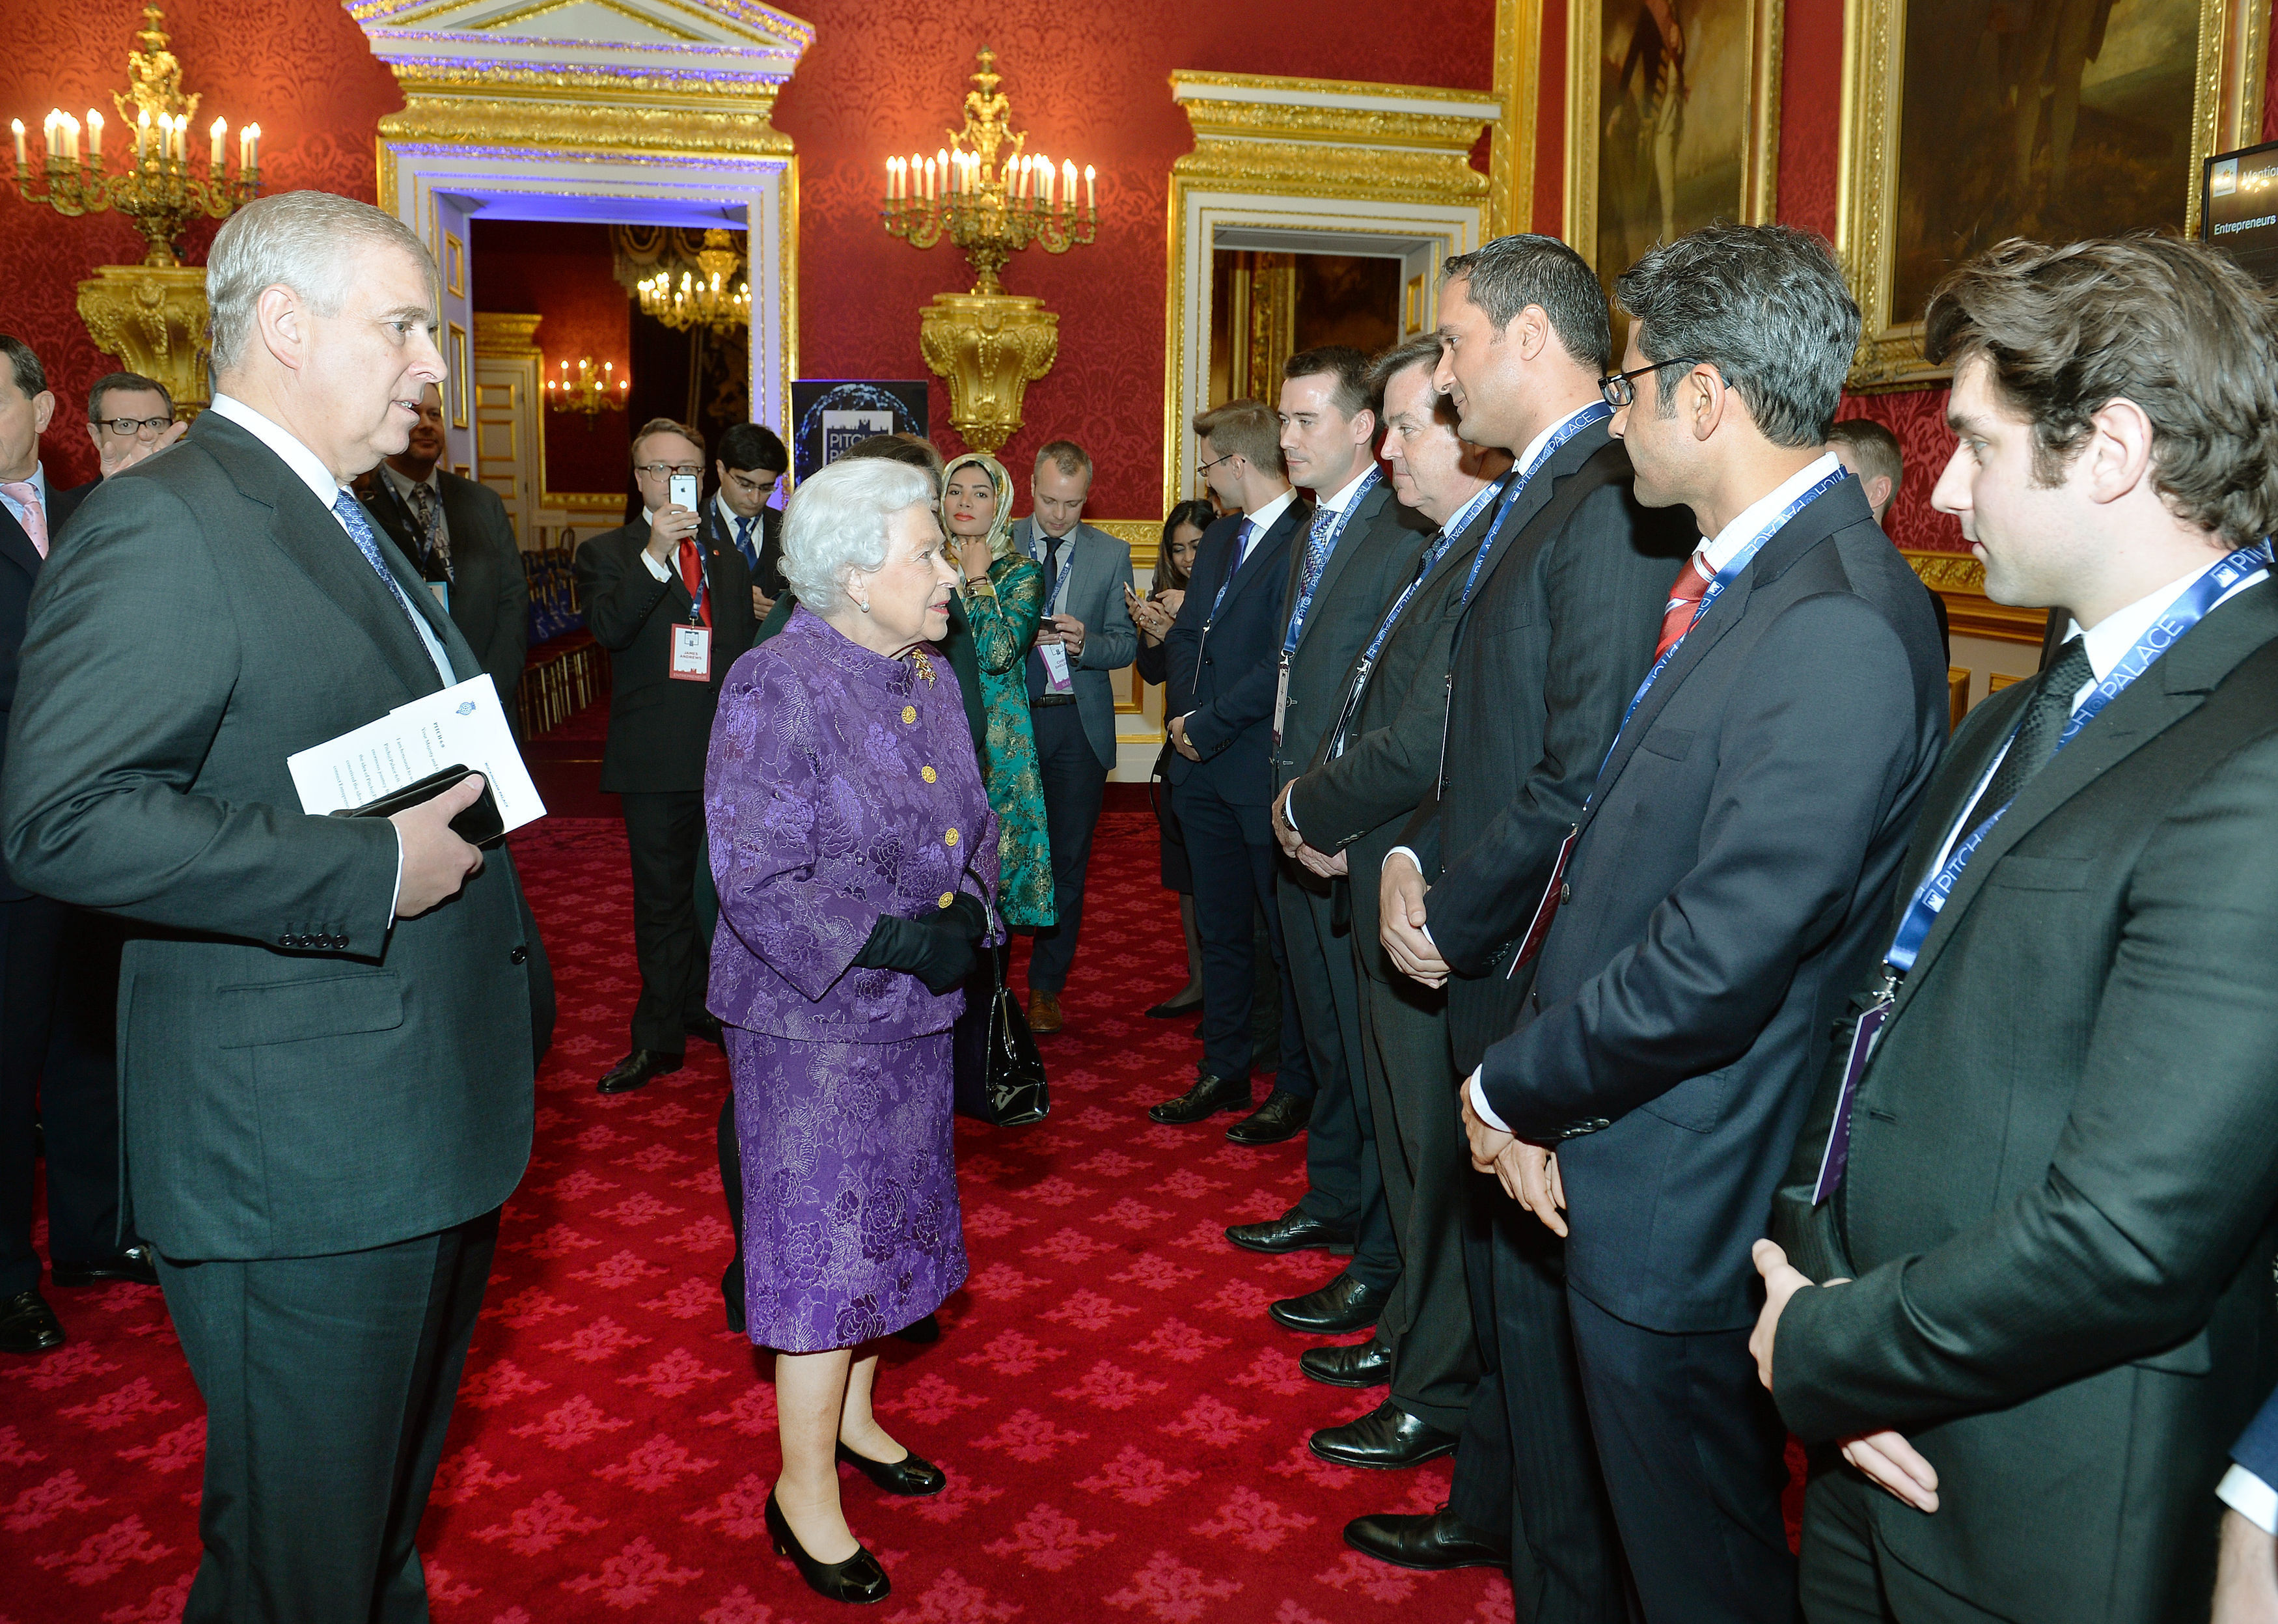 The Queen meets Pitch at the Palace entreprenuers